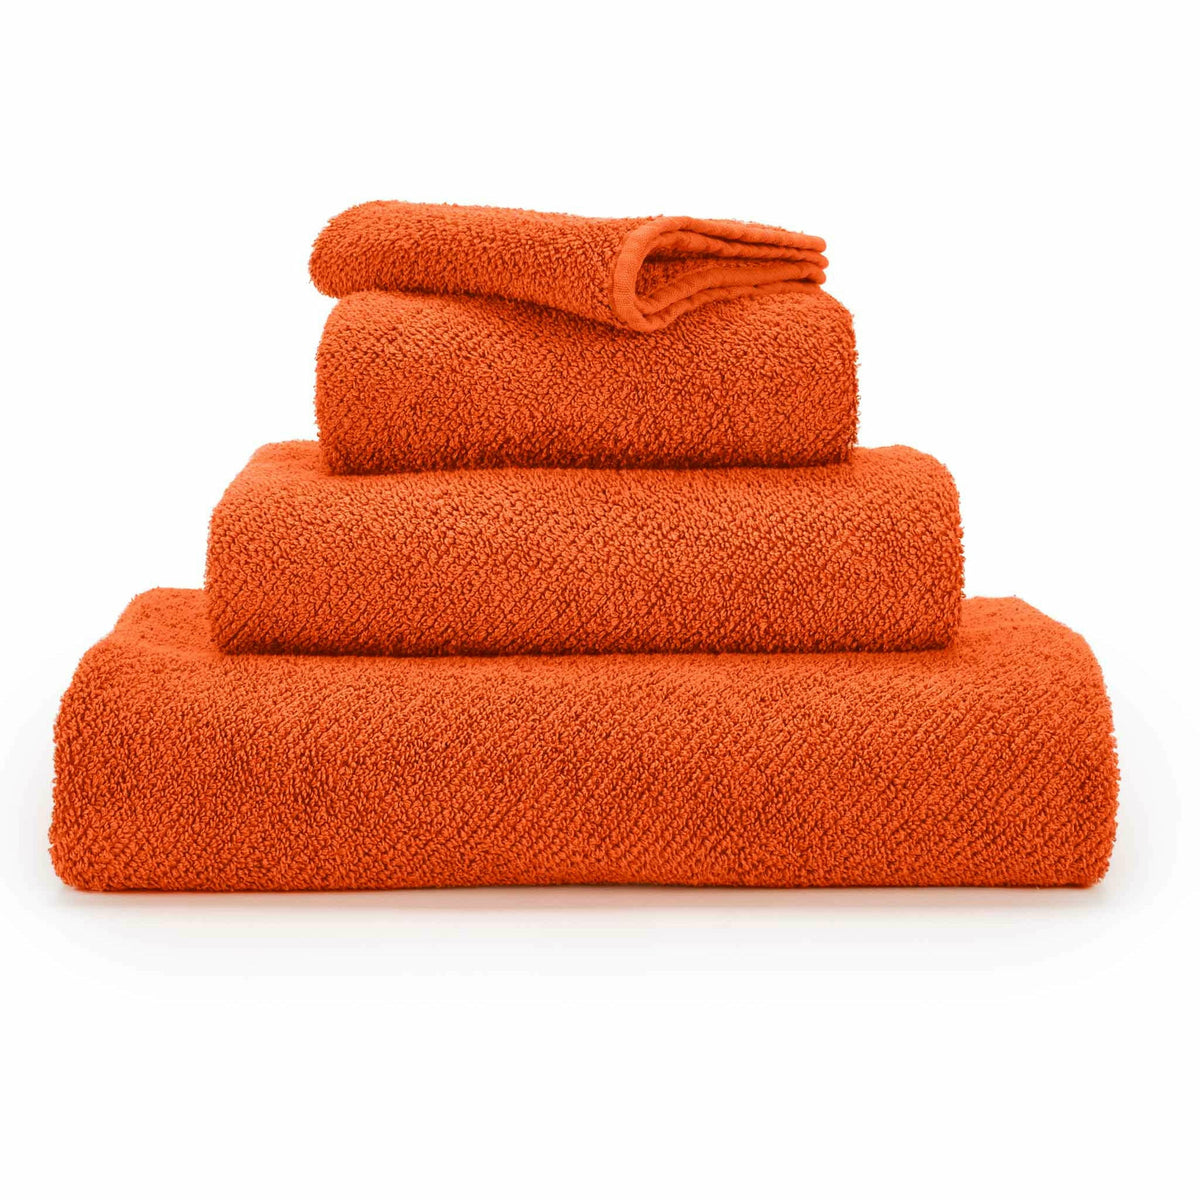 Abyss Twill Bath Towels Stack Tangerine Fine Linens 